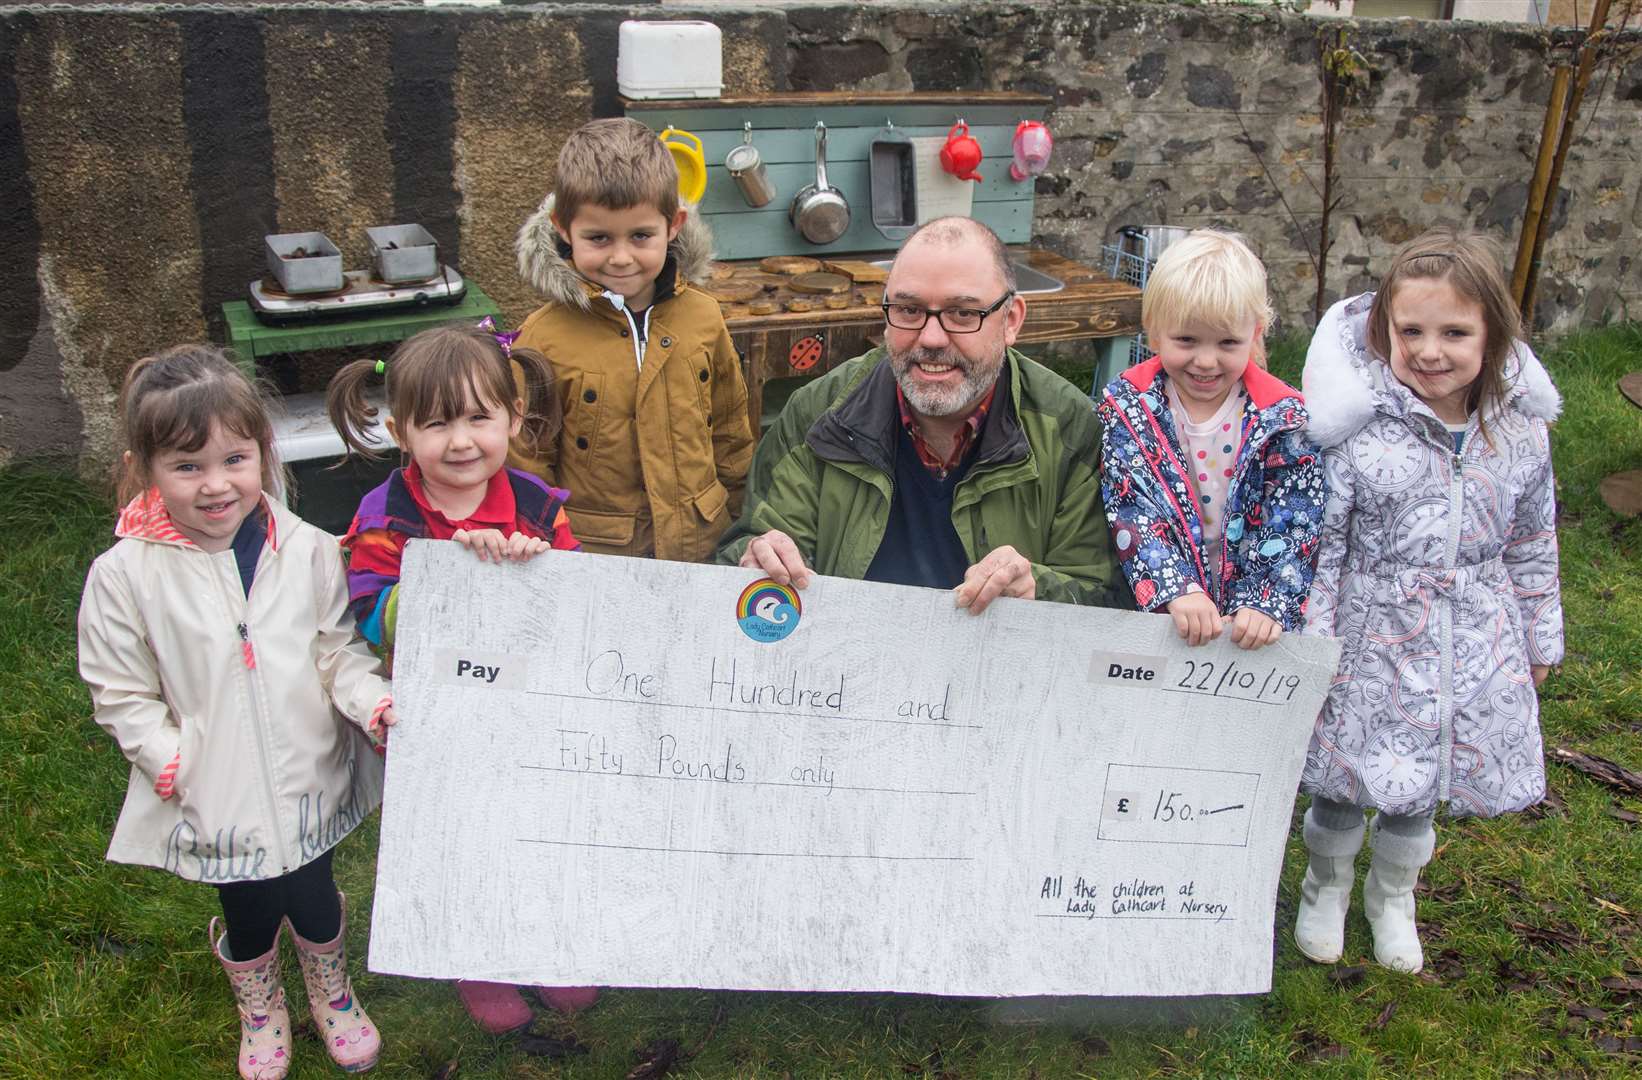 Alistair Webster from Cullen Men's Shed accepts a cheque for £150 from Lady Cathcart nursery pupils (from left) Kaydee Green, Mya-Rose Dougall, Alec Petkov, Abbie Sutherland and Anna Danailova. Picture: Becky Saunderson